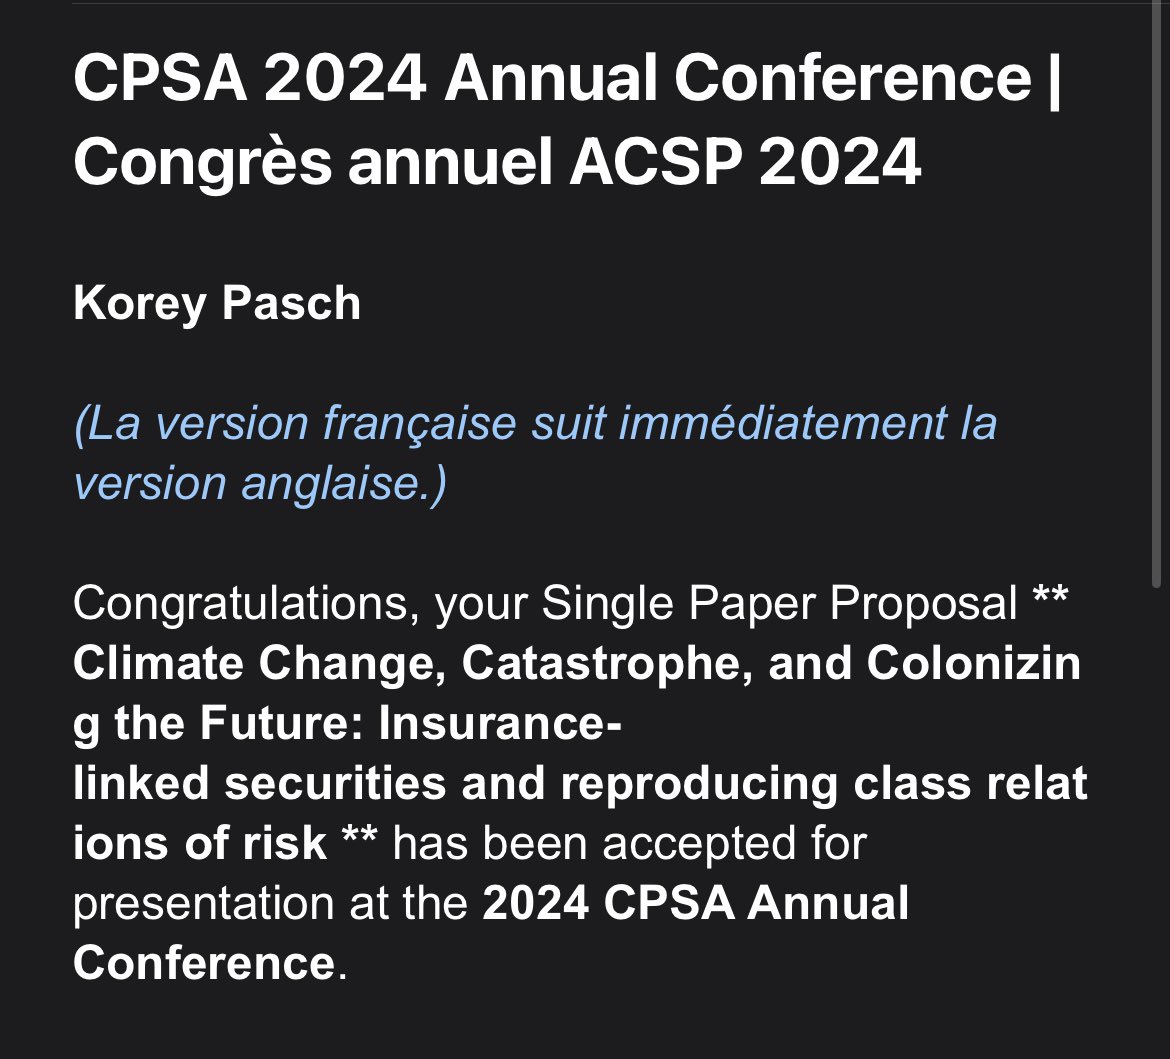 Very excited to have a paper accepted to the Canadian Political Science Association’s Annual Conference in 2024! A lovely way to end the year! Always honoured to have my work considered and included! 🙏🏻🙌🏻🎉#CPSA_ACSP24